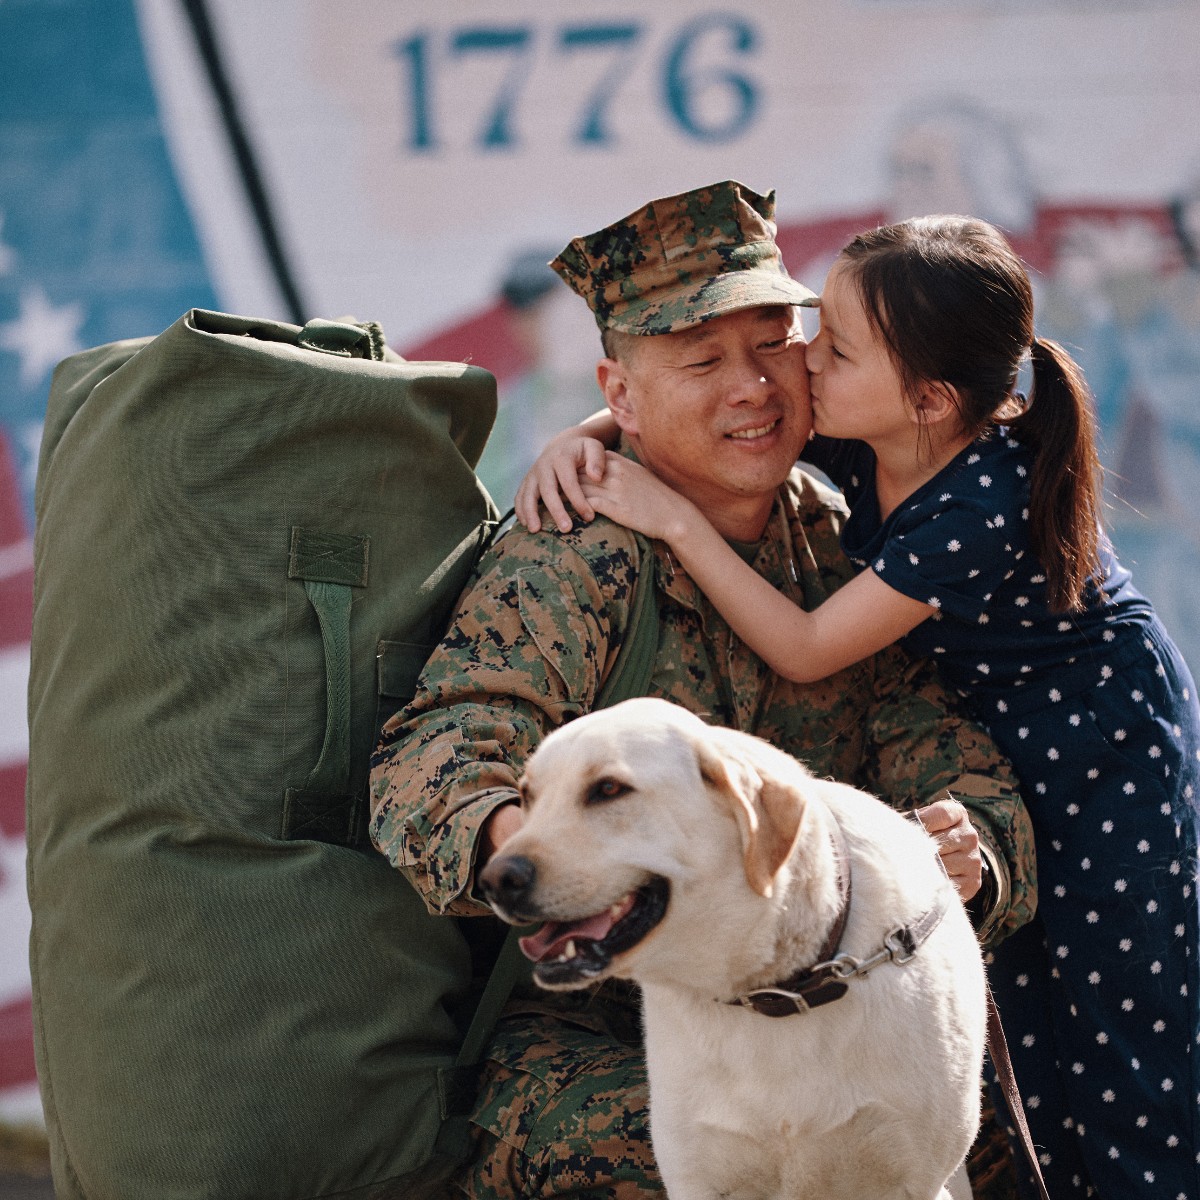 Join us as we celebrate Military Appreciation Month, and let’s make a difference together. Because even the strongest among us need someone by their side. Visit uso.org/HumanToHuman. #theUSO #MilitaryAppreciationMonth